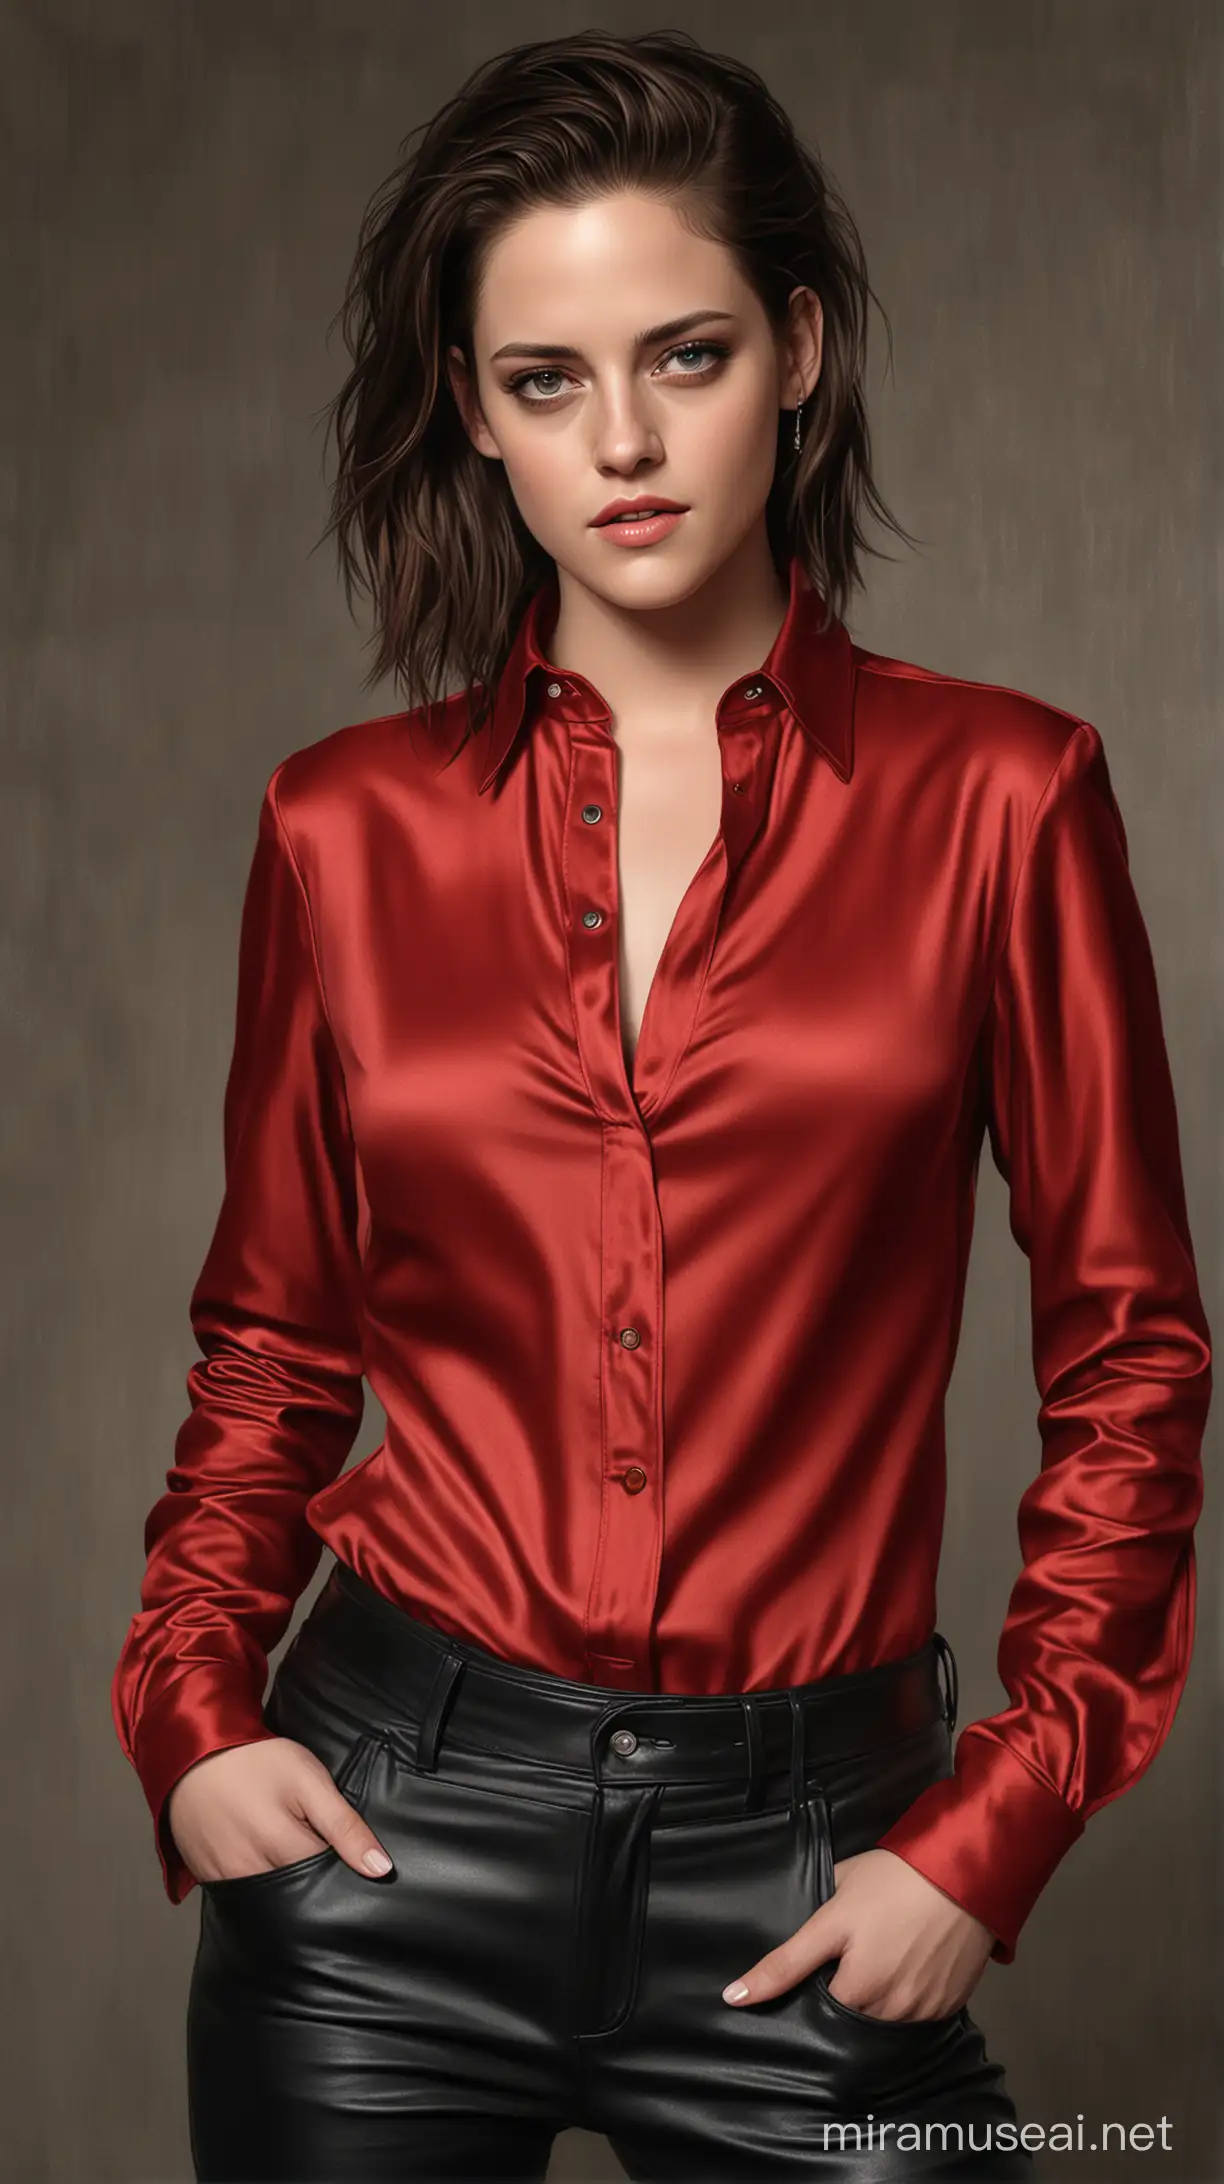 Kristen Stewart in Red Satin Blouse and Leather Pants Portrait